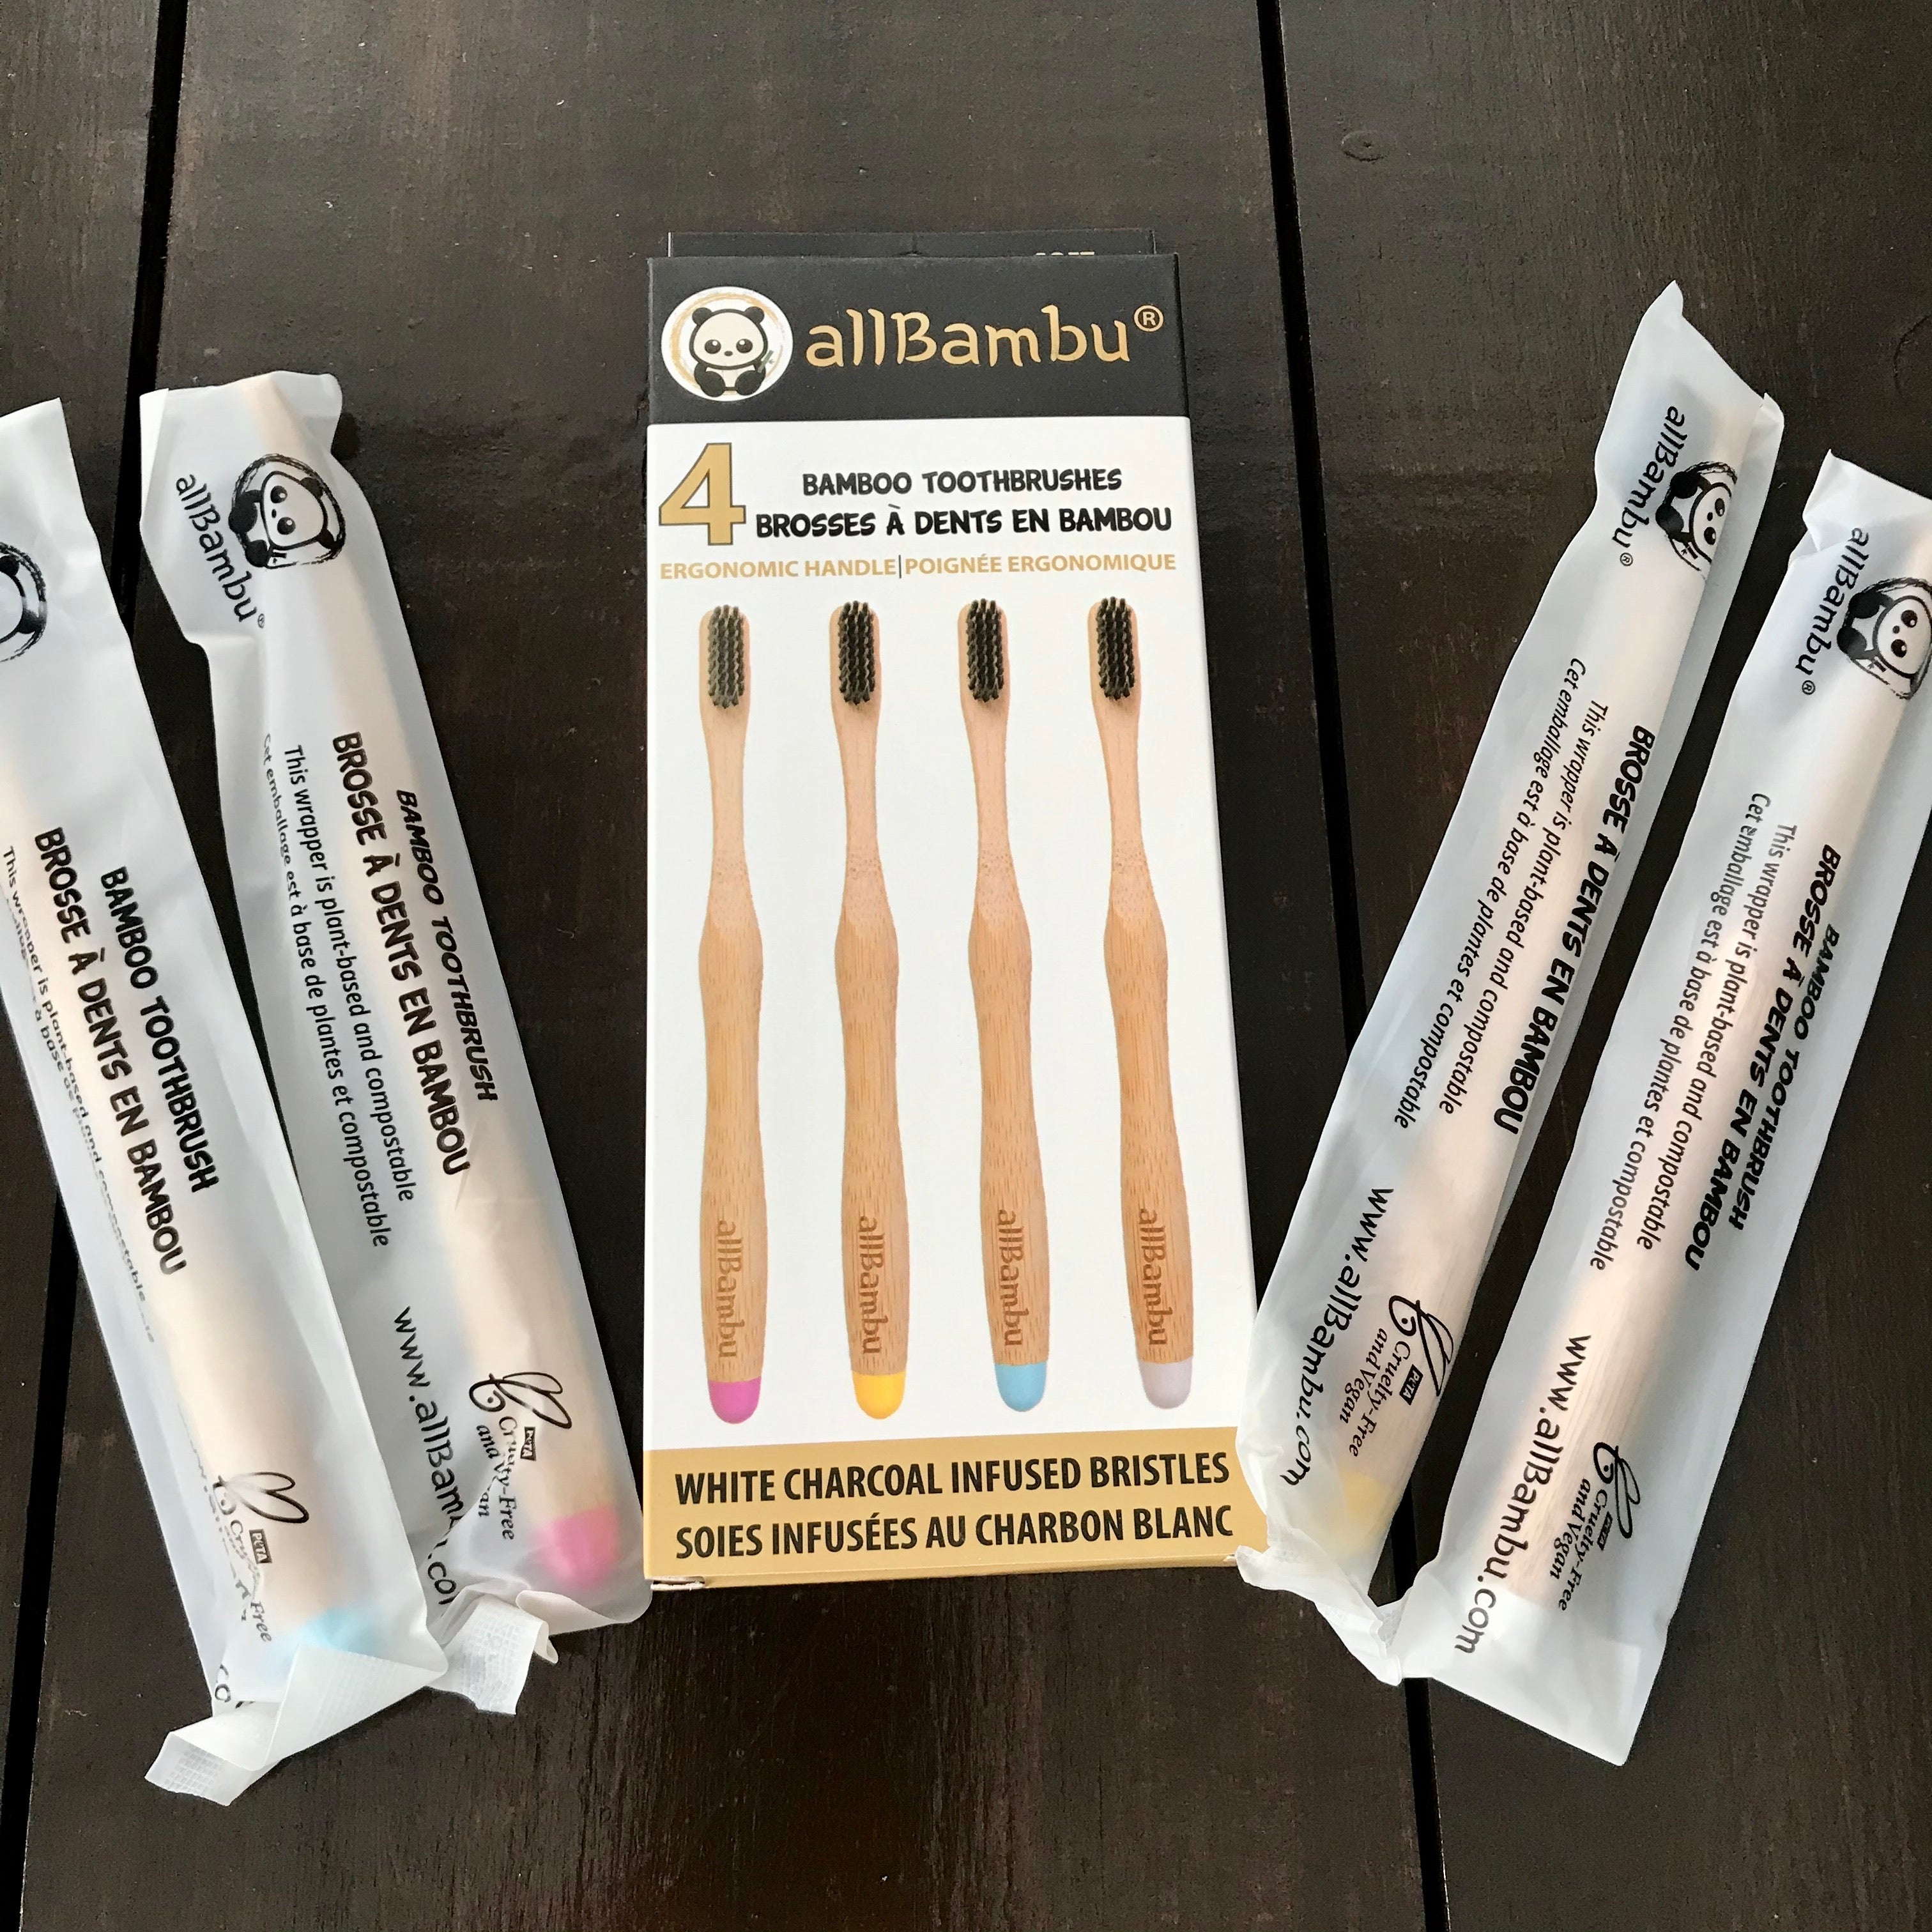 New compostable bamboo toothbrush packaging